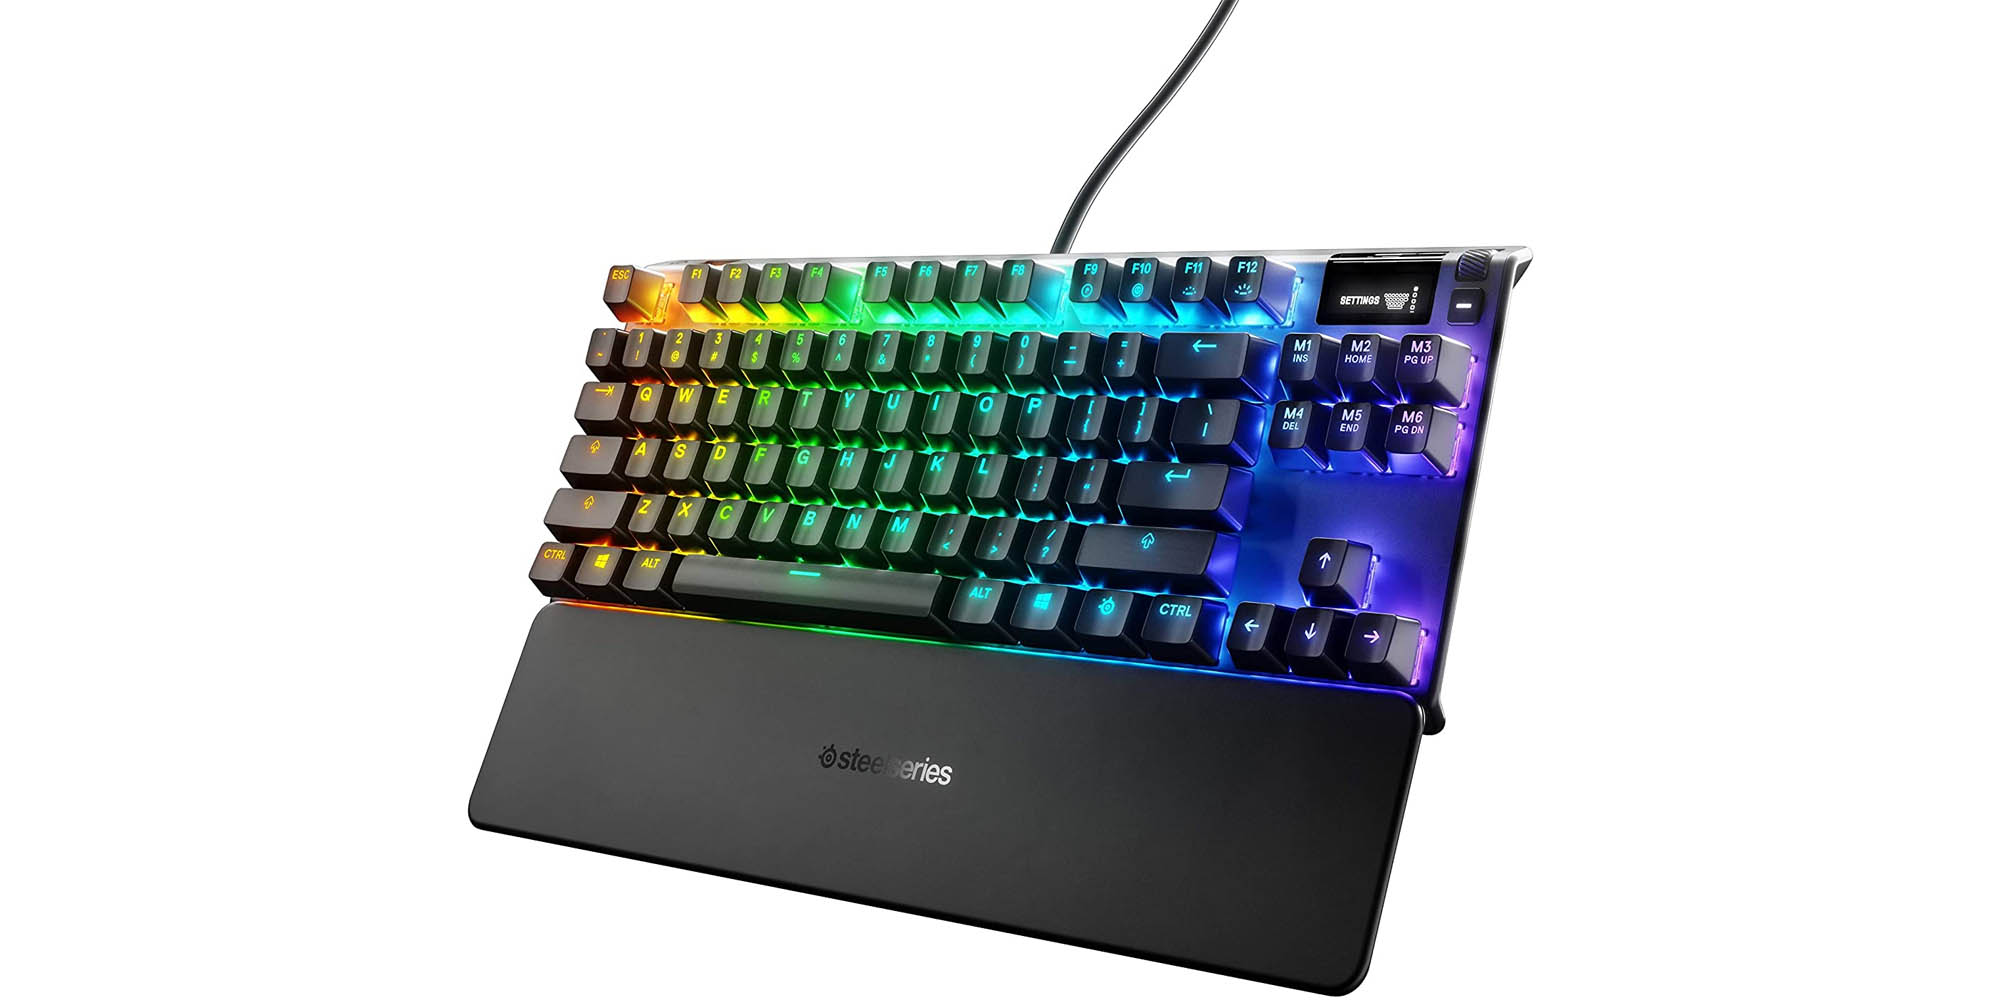 PC/タブレット PC周辺機器 Save 25% on SteelSeries' Apex Pro TKL Mechanical Keyboard at its 